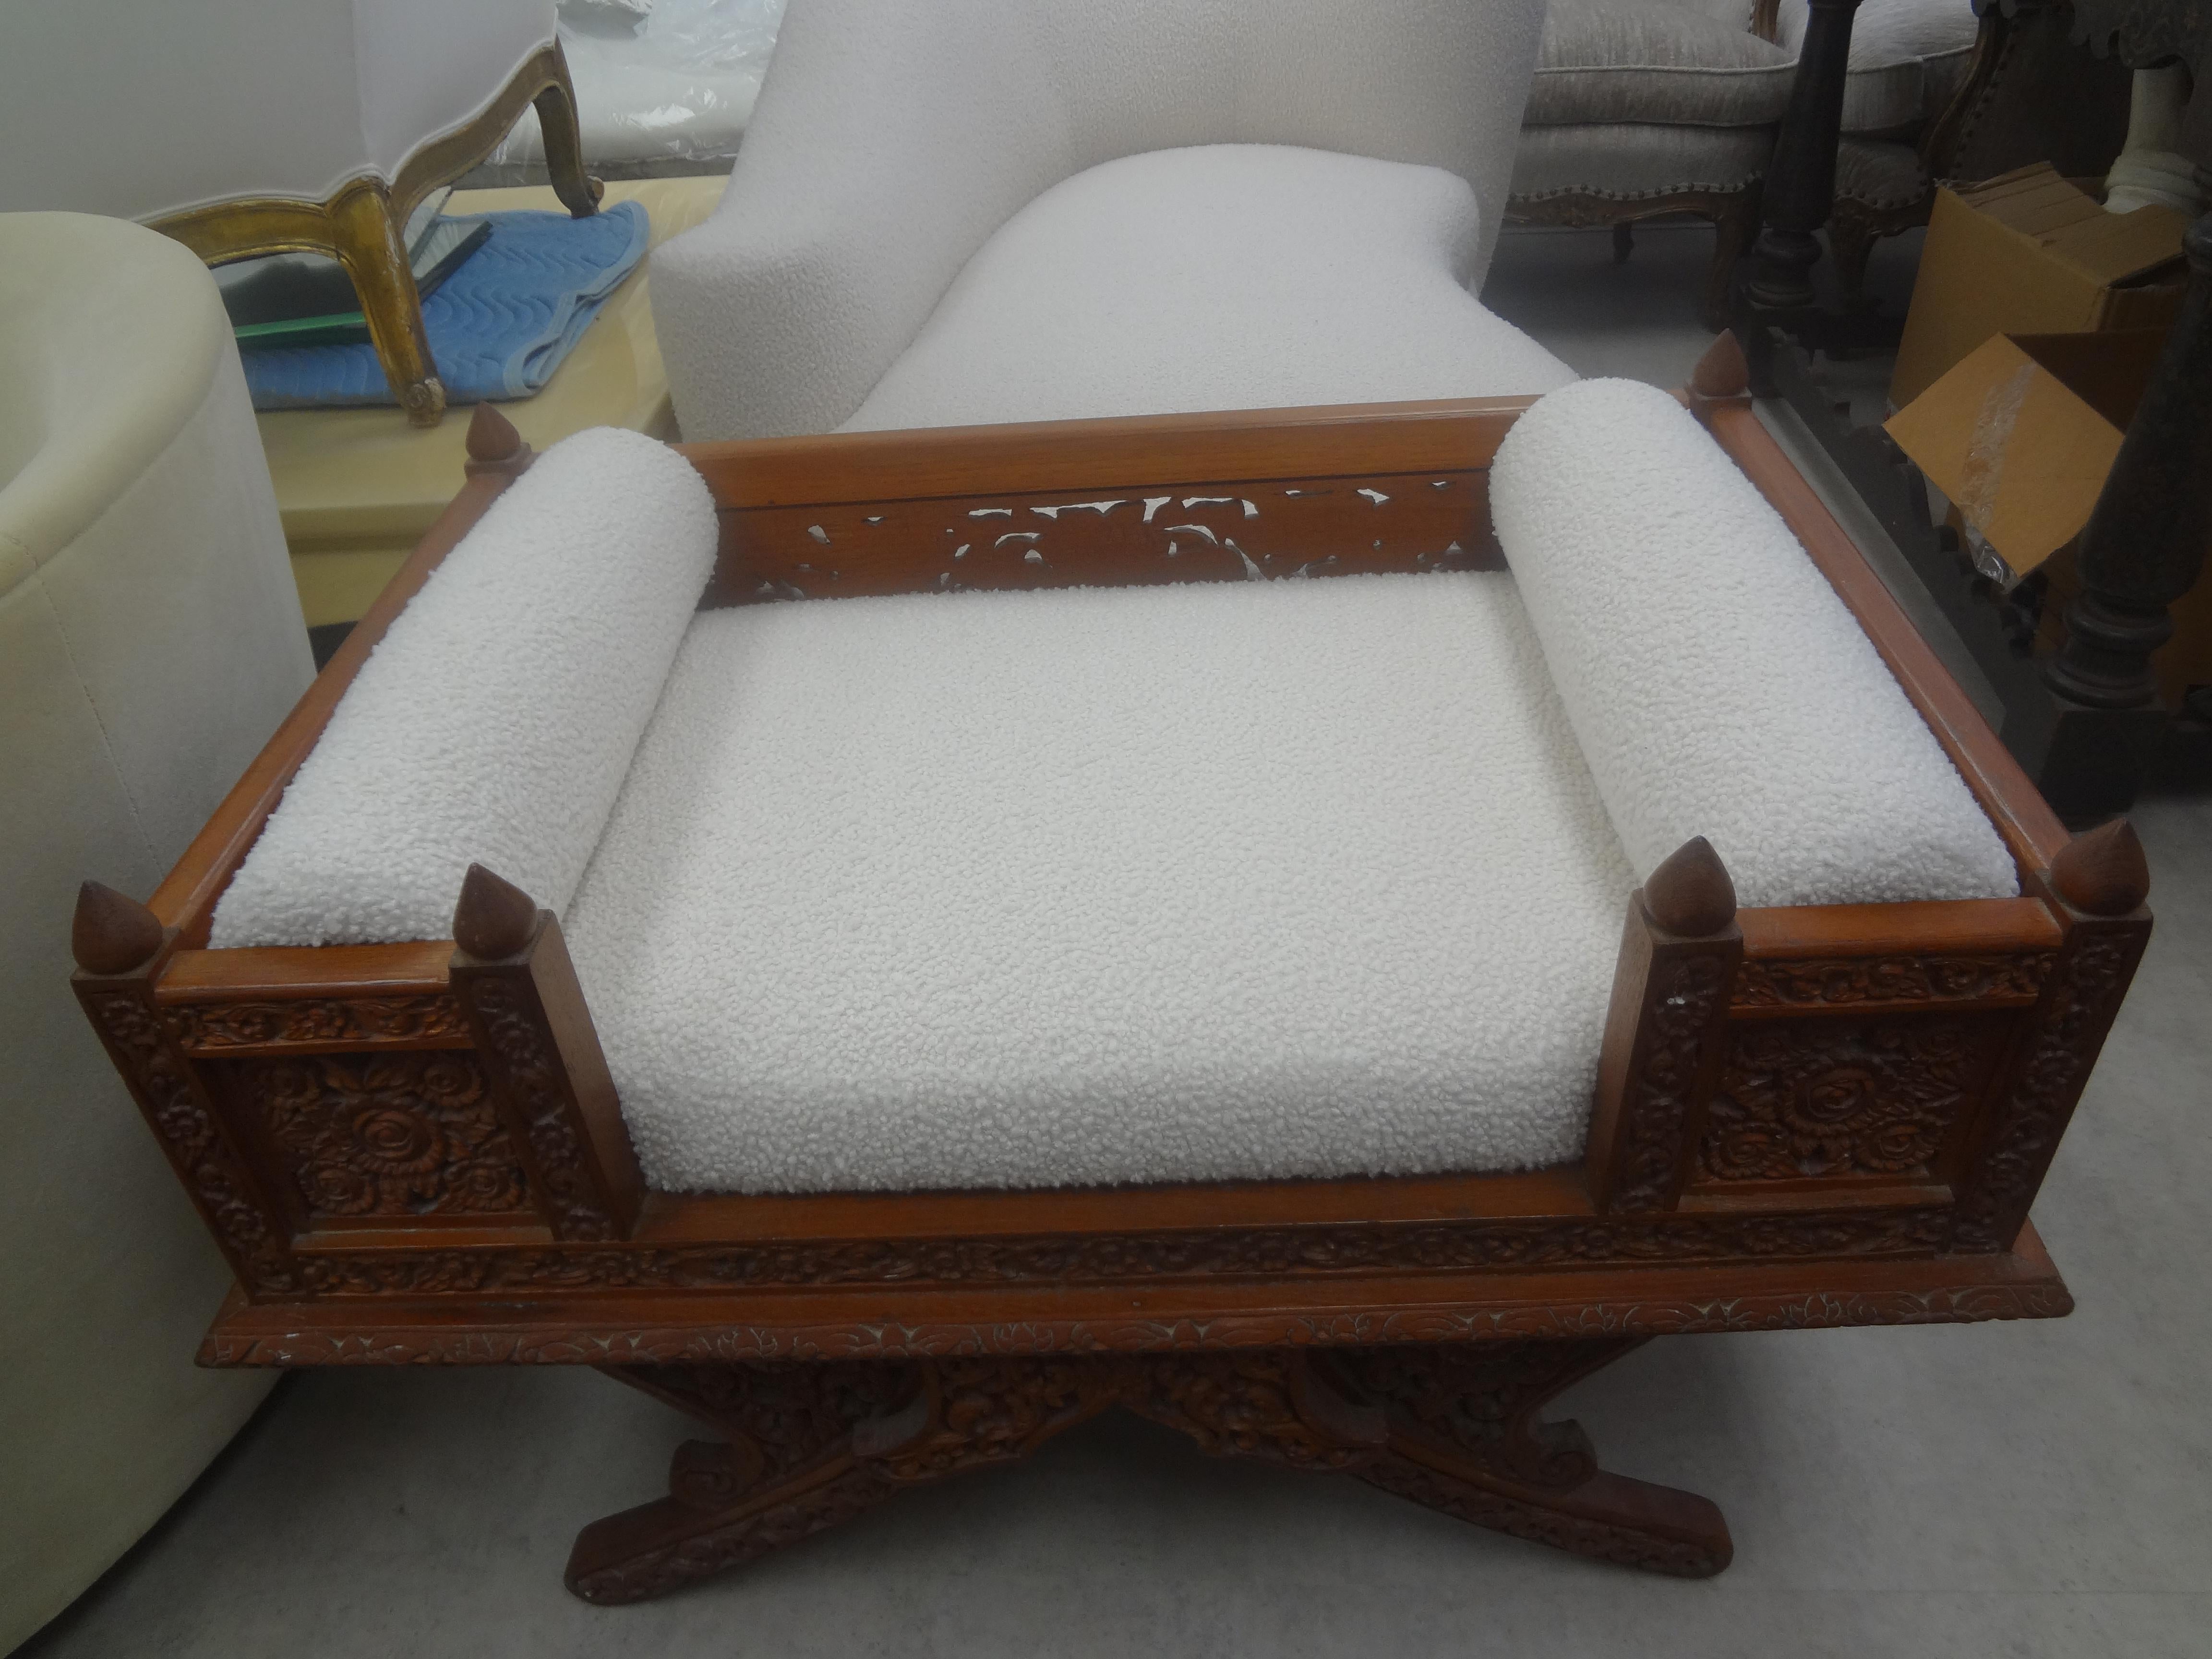 Teak Howdah Elephant Saddle Chair.
Beautifully carved Asian teakwood Howdah elephant saddle chair or bench, Thailand, 1920.
This unusual Anglo-Indian chair or bench has been newly upholstered in cream boucle fabric with a cushion and two side